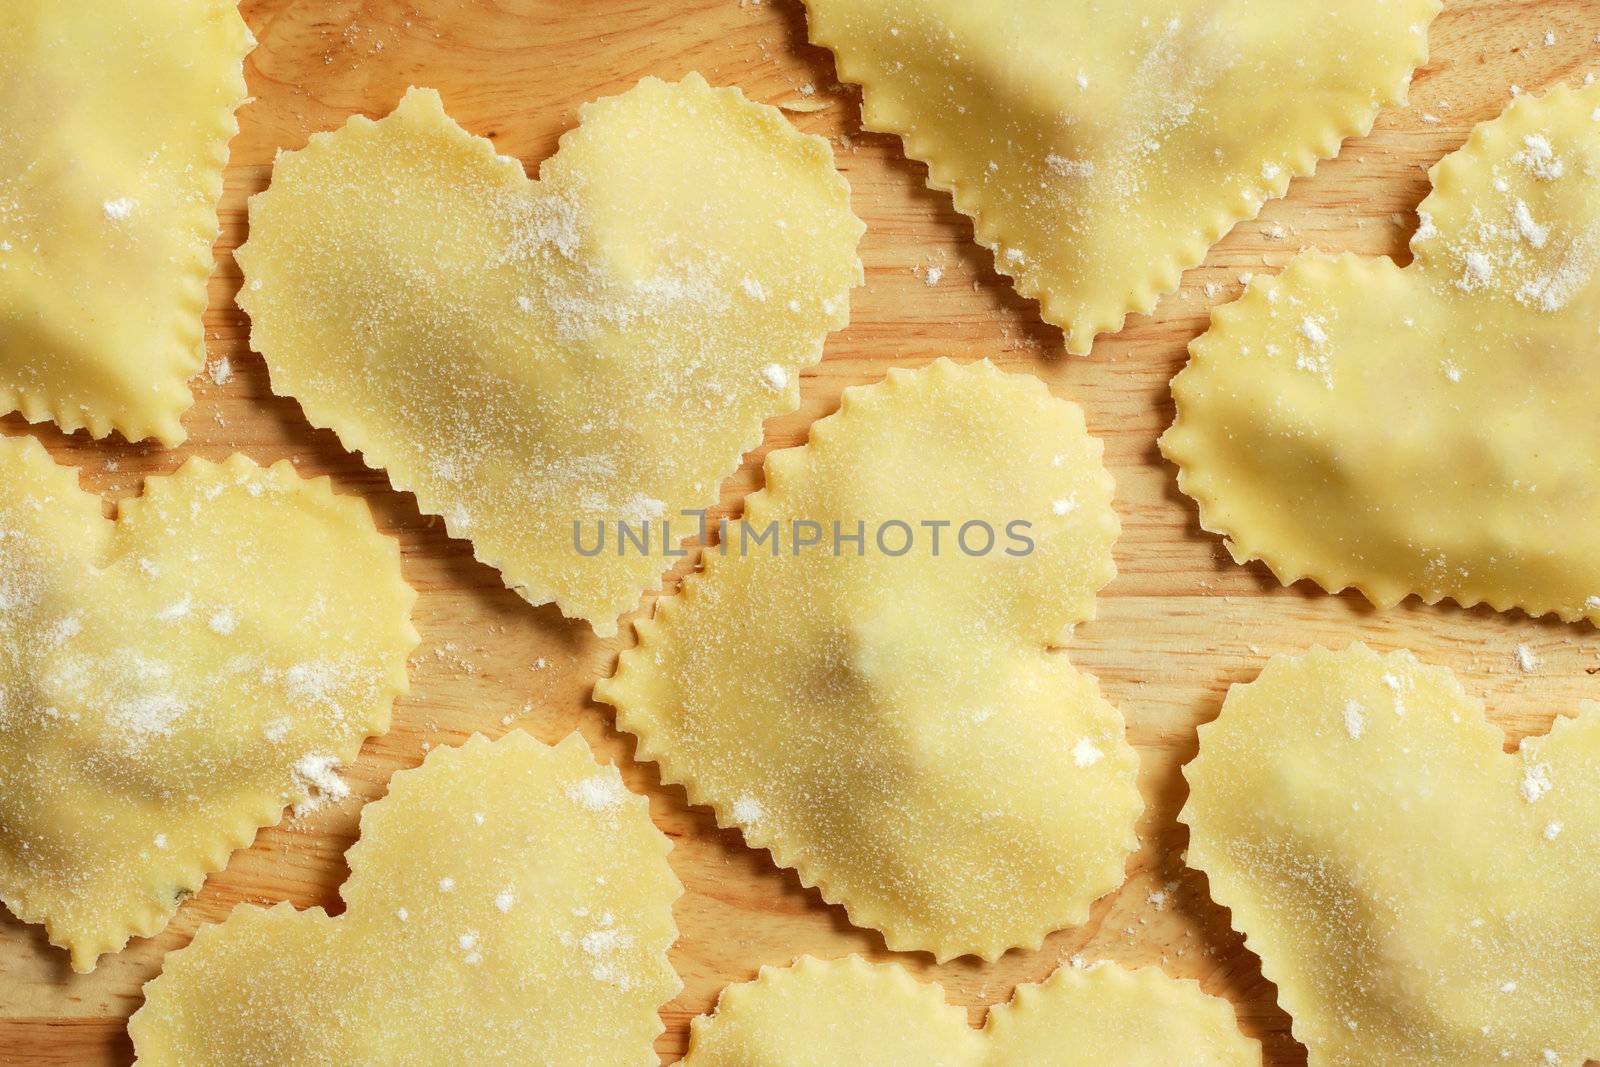 Heart-shaped homemade pasta sitting on a wooden countertop.
